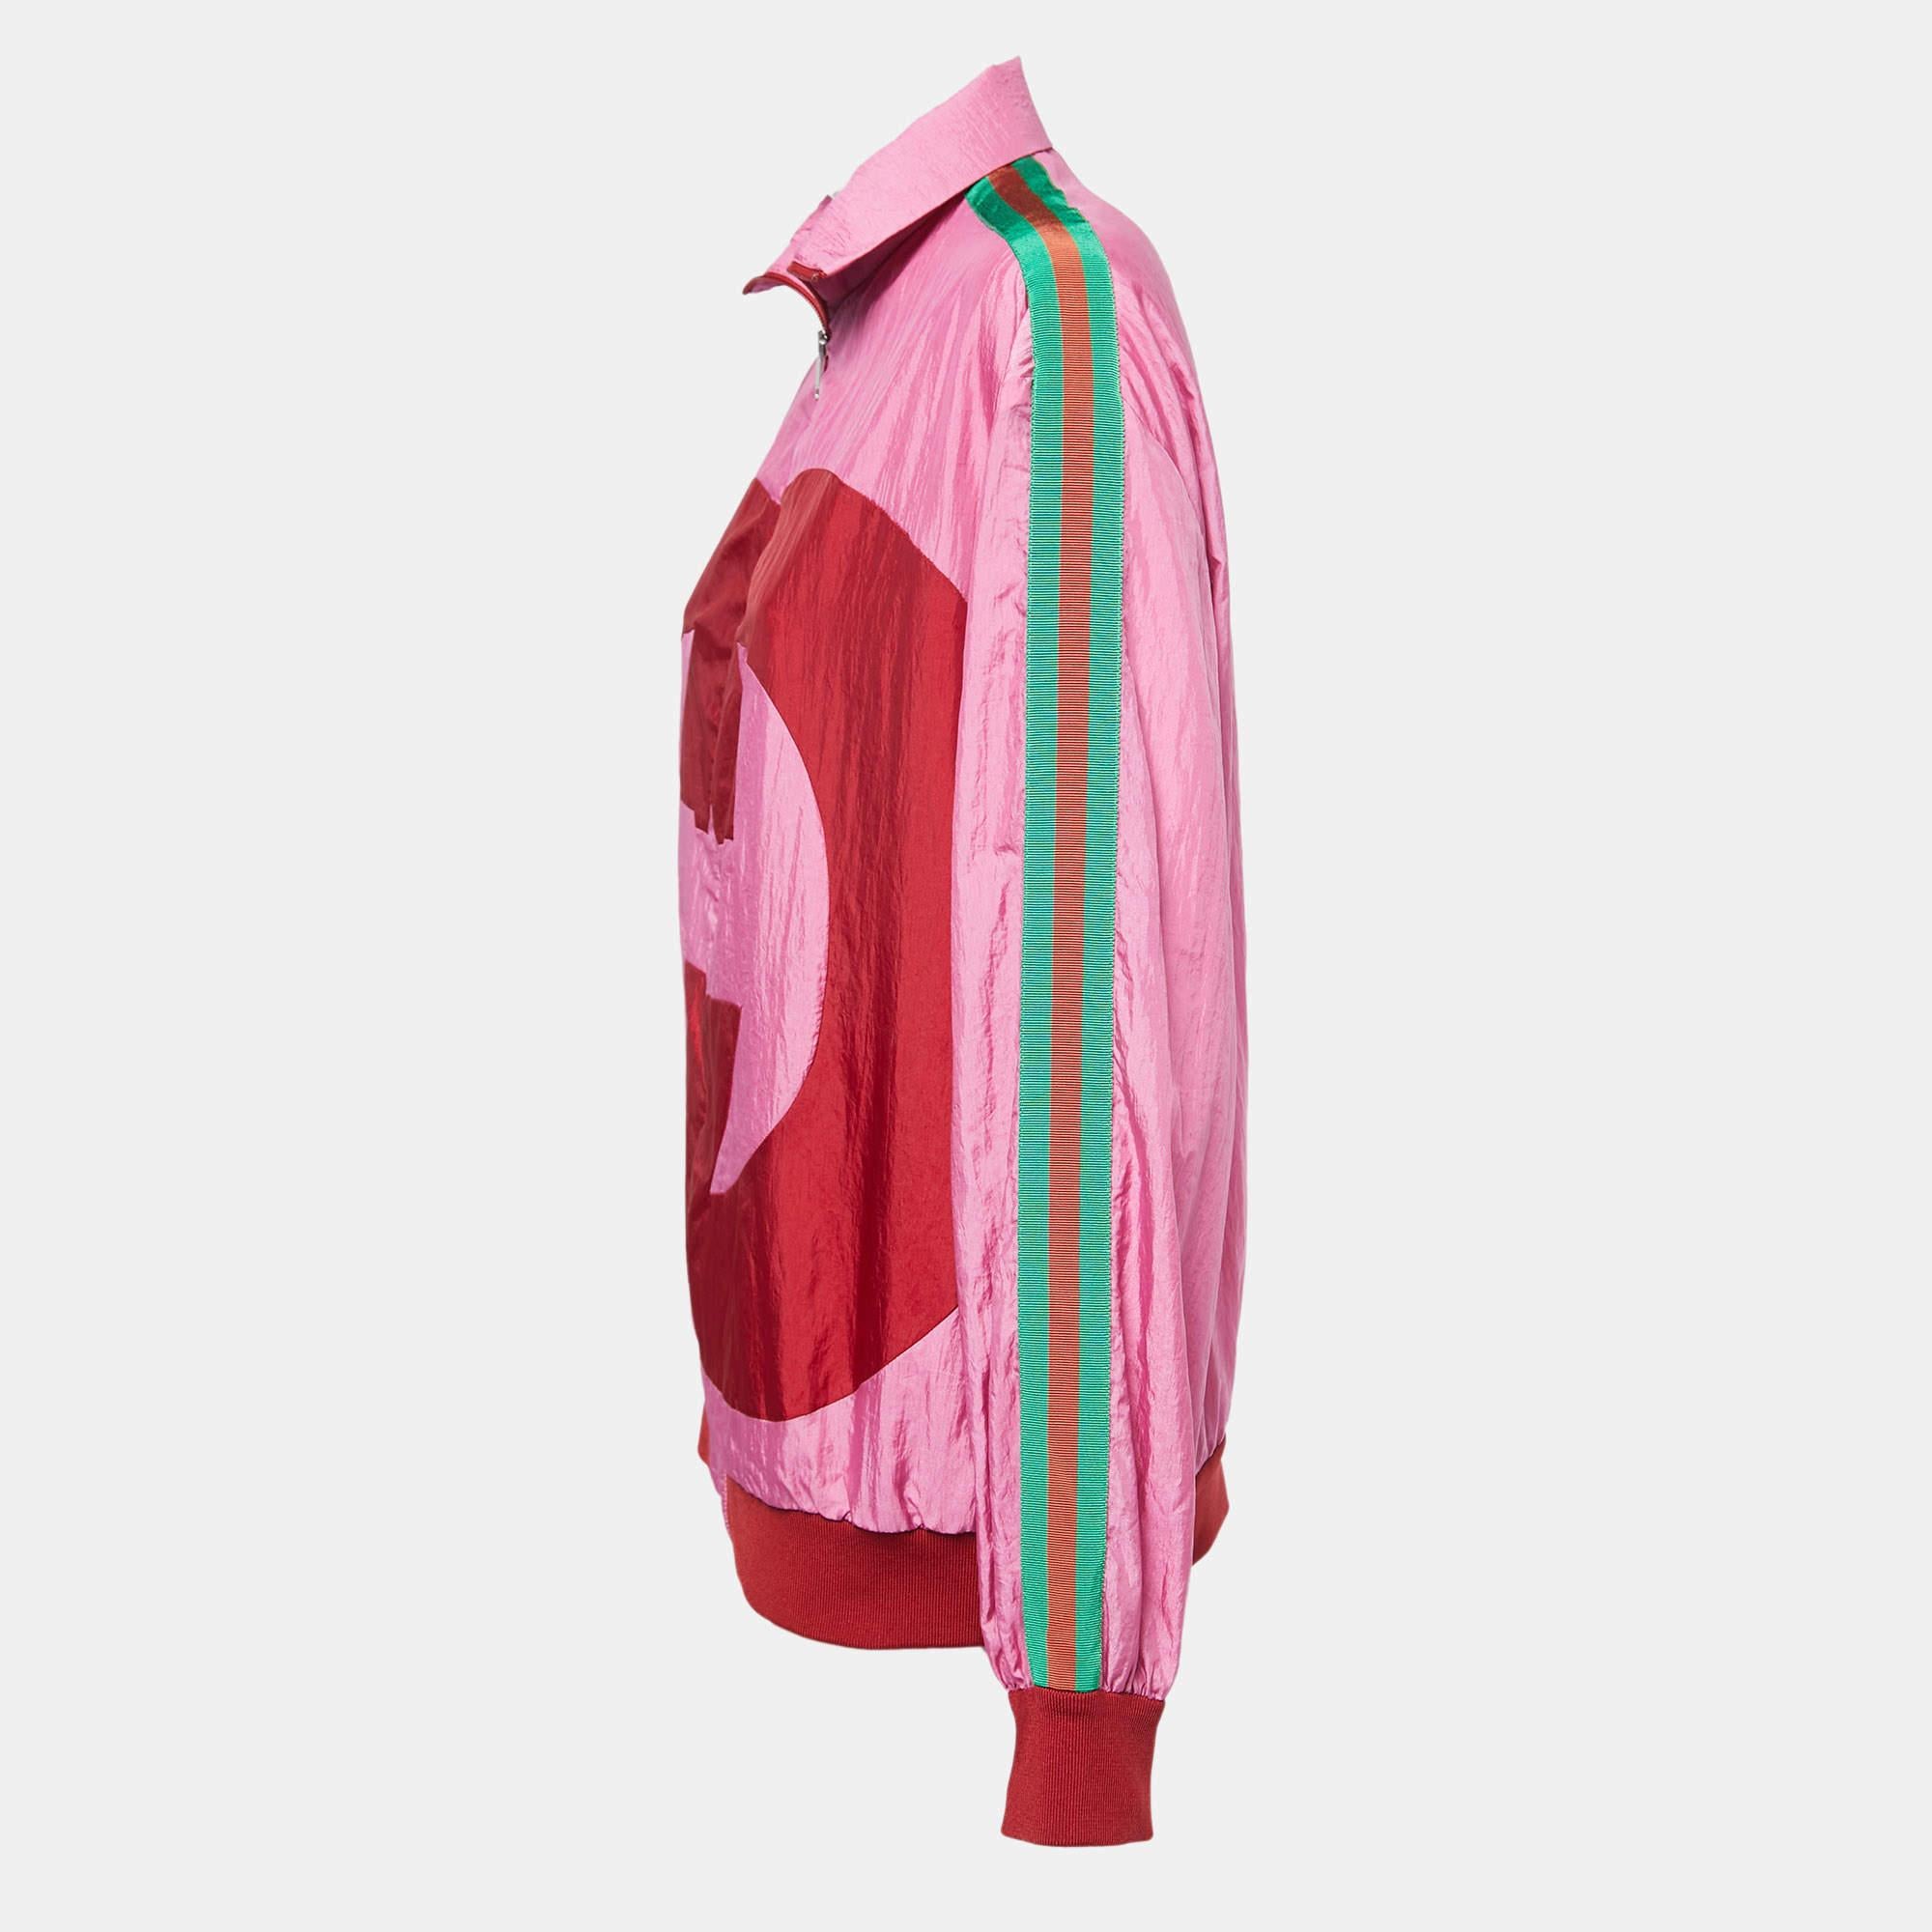 The Gucci bomber jacket is a vibrant and stylish outerwear piece that combines luxury and streetwear. Featuring a striking colorblock design in pink hues and bold web stripes, this jacket showcases the iconic Gucci logo for a statement-making look.